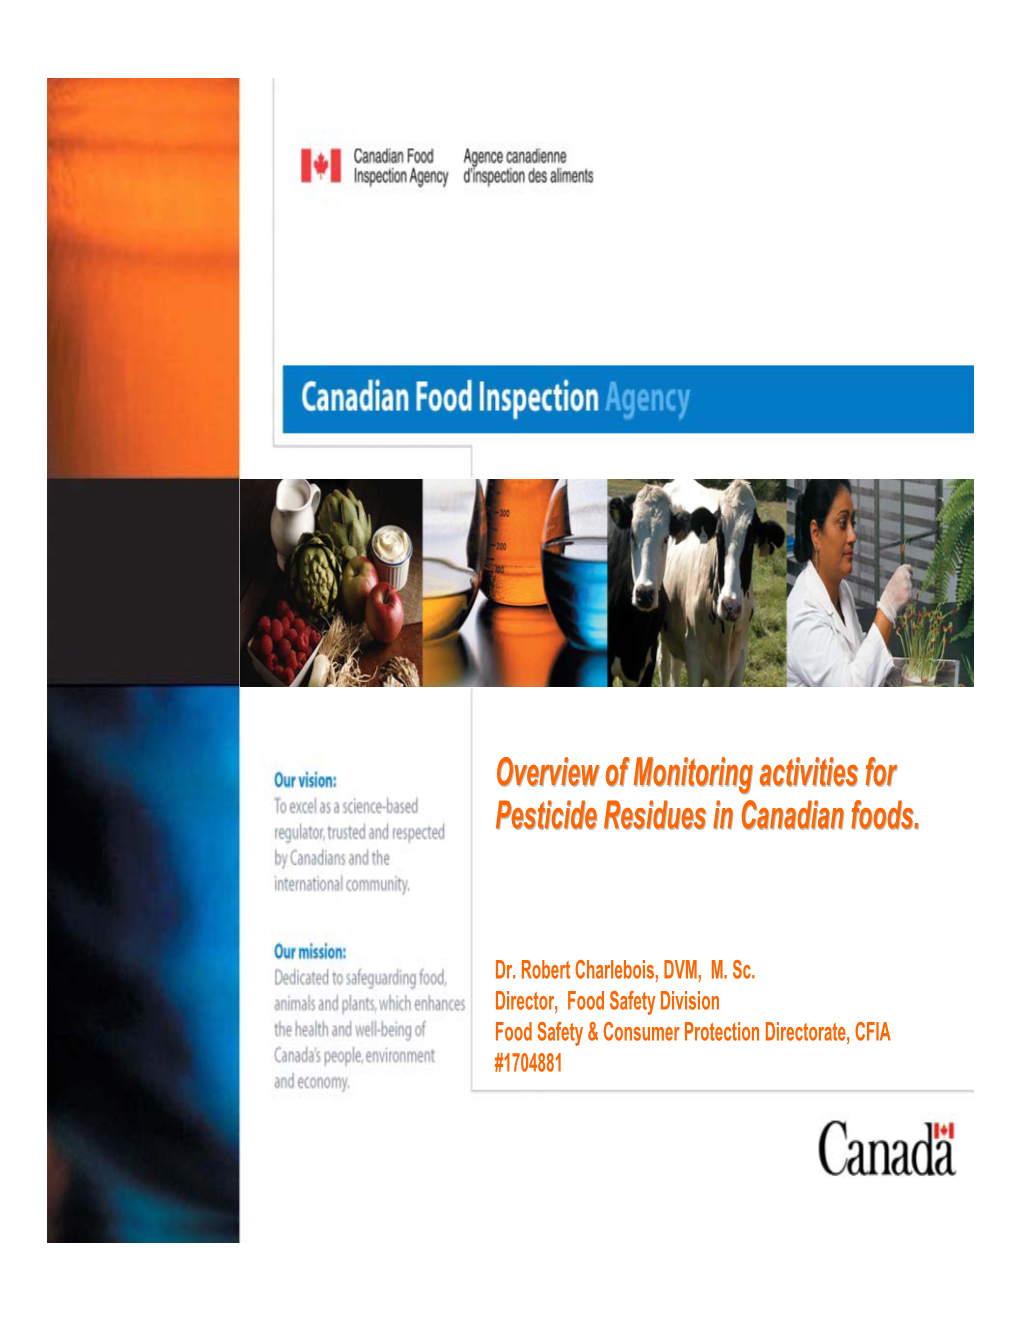 Overview of Monitoring Activities for Pesticide Residues in Canadian Foods